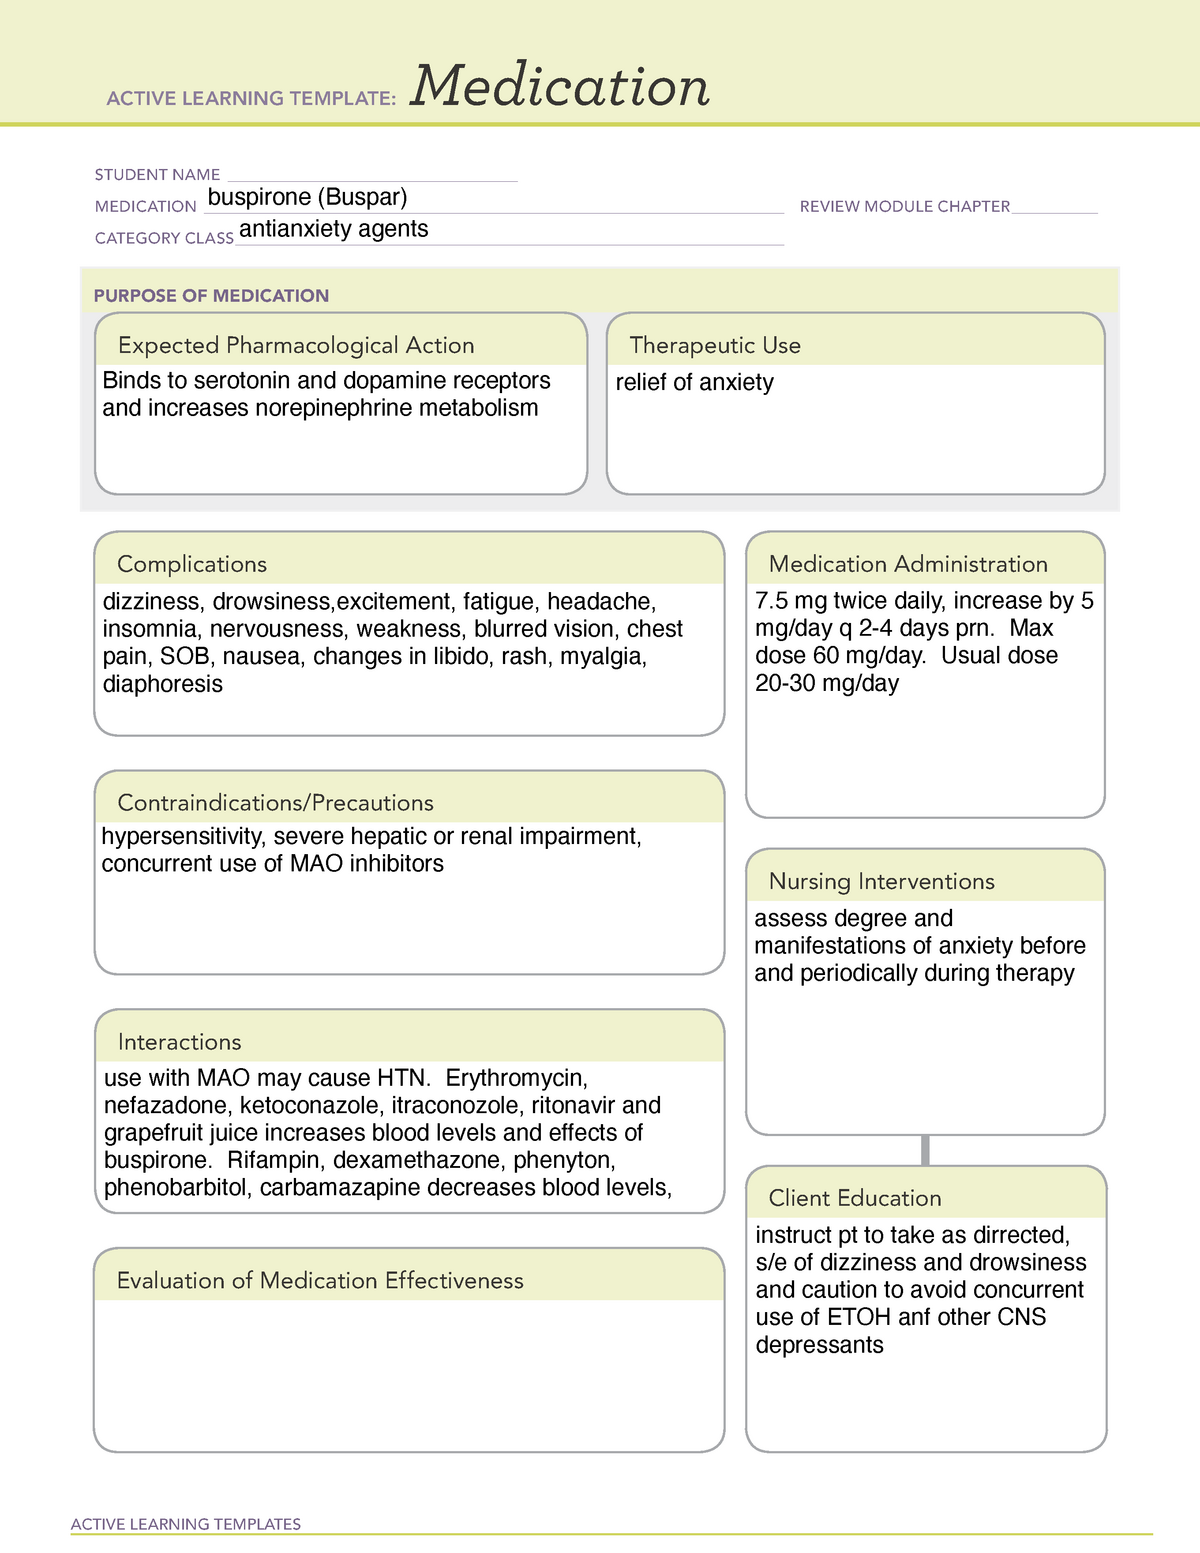 active-learning-template-medication-10-active-learning-templates-vrogue